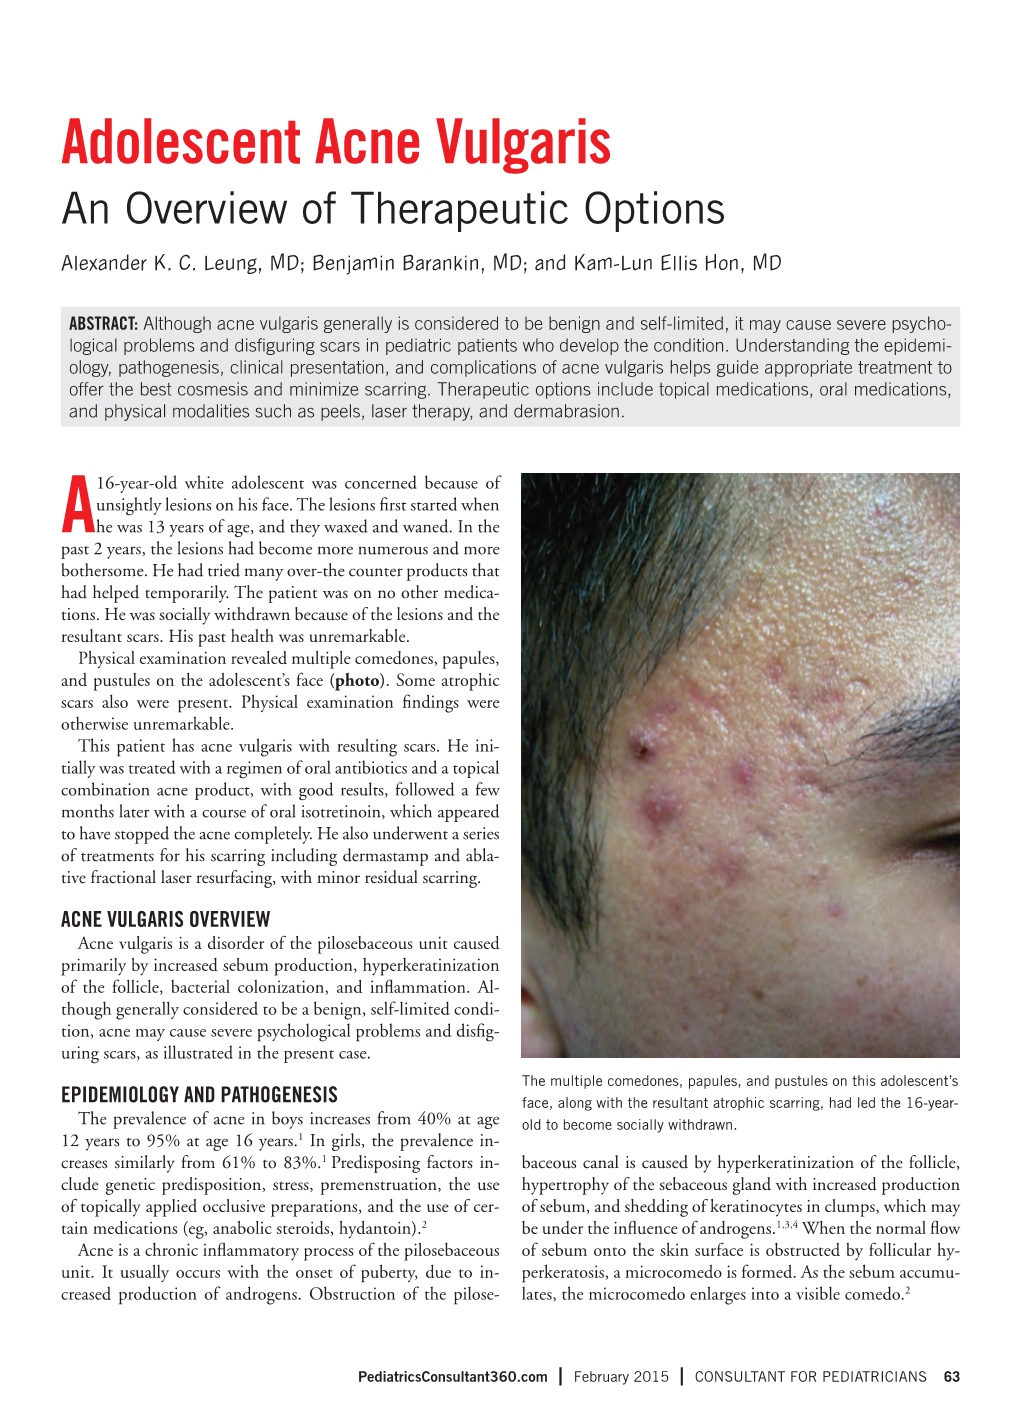 Adolescent Acne Vulgaris an Overview of Therapeutic Options